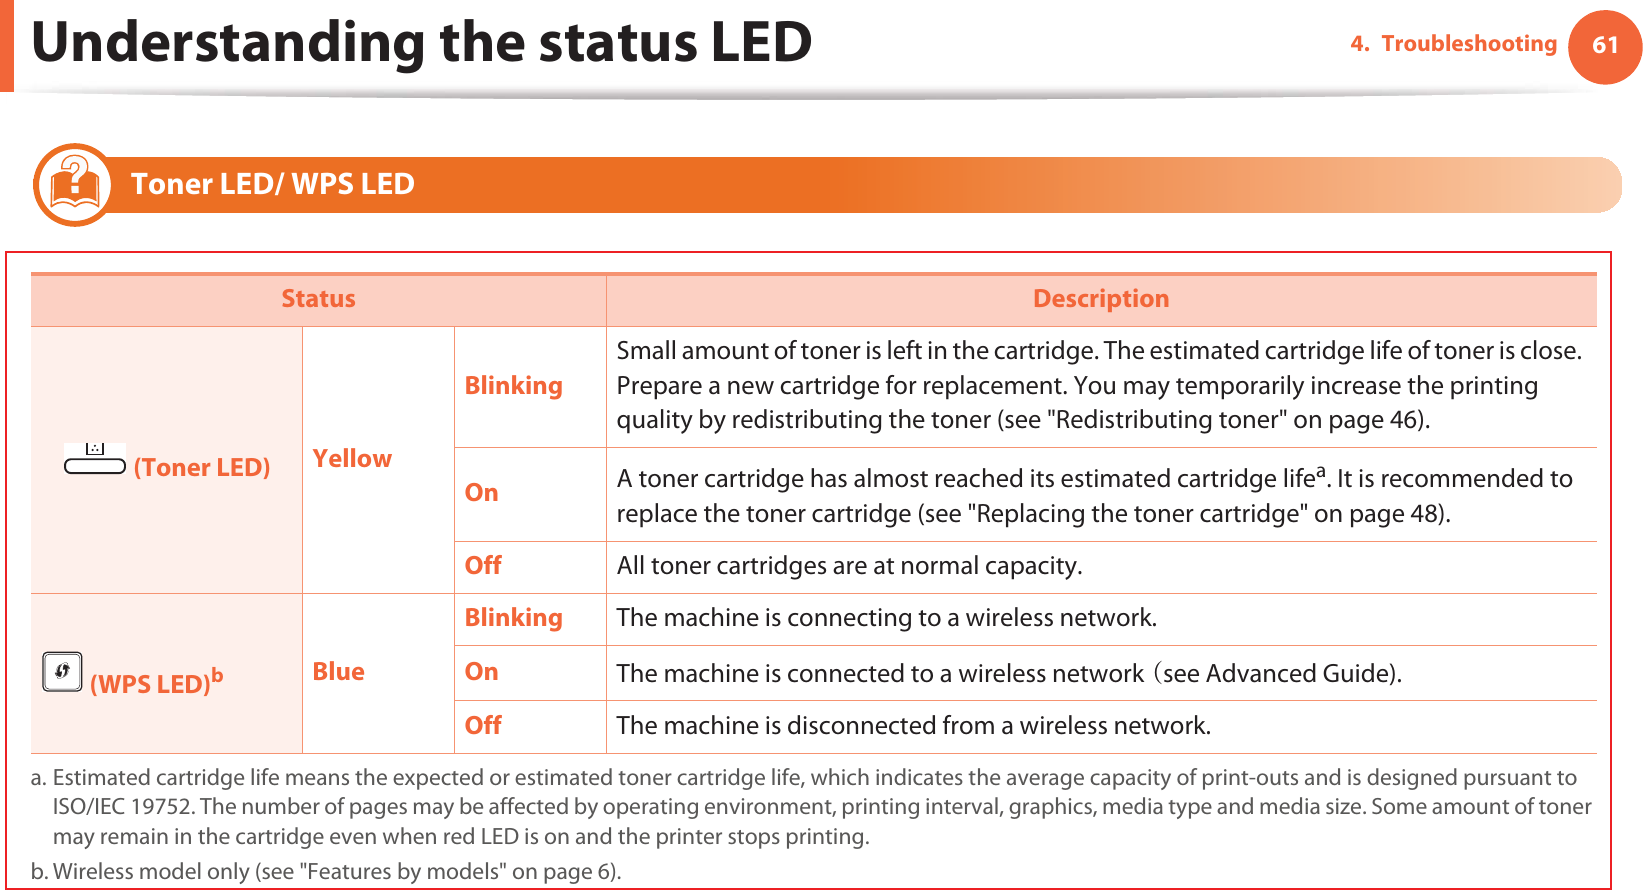 Understanding the status LED 614. Troubleshooting6 Toner LED/ WPS LED  Status Description (Toner LED) YellowBlinkingSmall amount of toner is left in the cartridge. The estimated cartridge life of toner is close. Prepare a new cartridge for replacement. You may temporarily increase the printing quality by redistributing the toner (see &quot;Redistributing toner&quot; on page 46).On A toner cartridge has almost reached its estimated cartridge lifea. It is recommended to replace the toner cartridge (see &quot;Replacing the toner cartridge&quot; on page 48).a. Estimated cartridge life means the expected or estimated toner cartridge life, which indicates the average capacity of print-outs and is designed pursuant to ISO/IEC 19752. The number of pages may be affected by operating environment, printing interval, graphics, media type and media size. Some amount of toner may remain in the cartridge even when red LED is on and the printer stops printing.Off All toner cartridges are at normal capacity. (WPS LED)bb. Wireless model only (see &quot;Features by models&quot; on page 6).BlueBlinking The machine is connecting to a wireless network.On The machine is connected to a wireless networkGOsee Advanced Guide).Off The machine is disconnected from a wireless network.